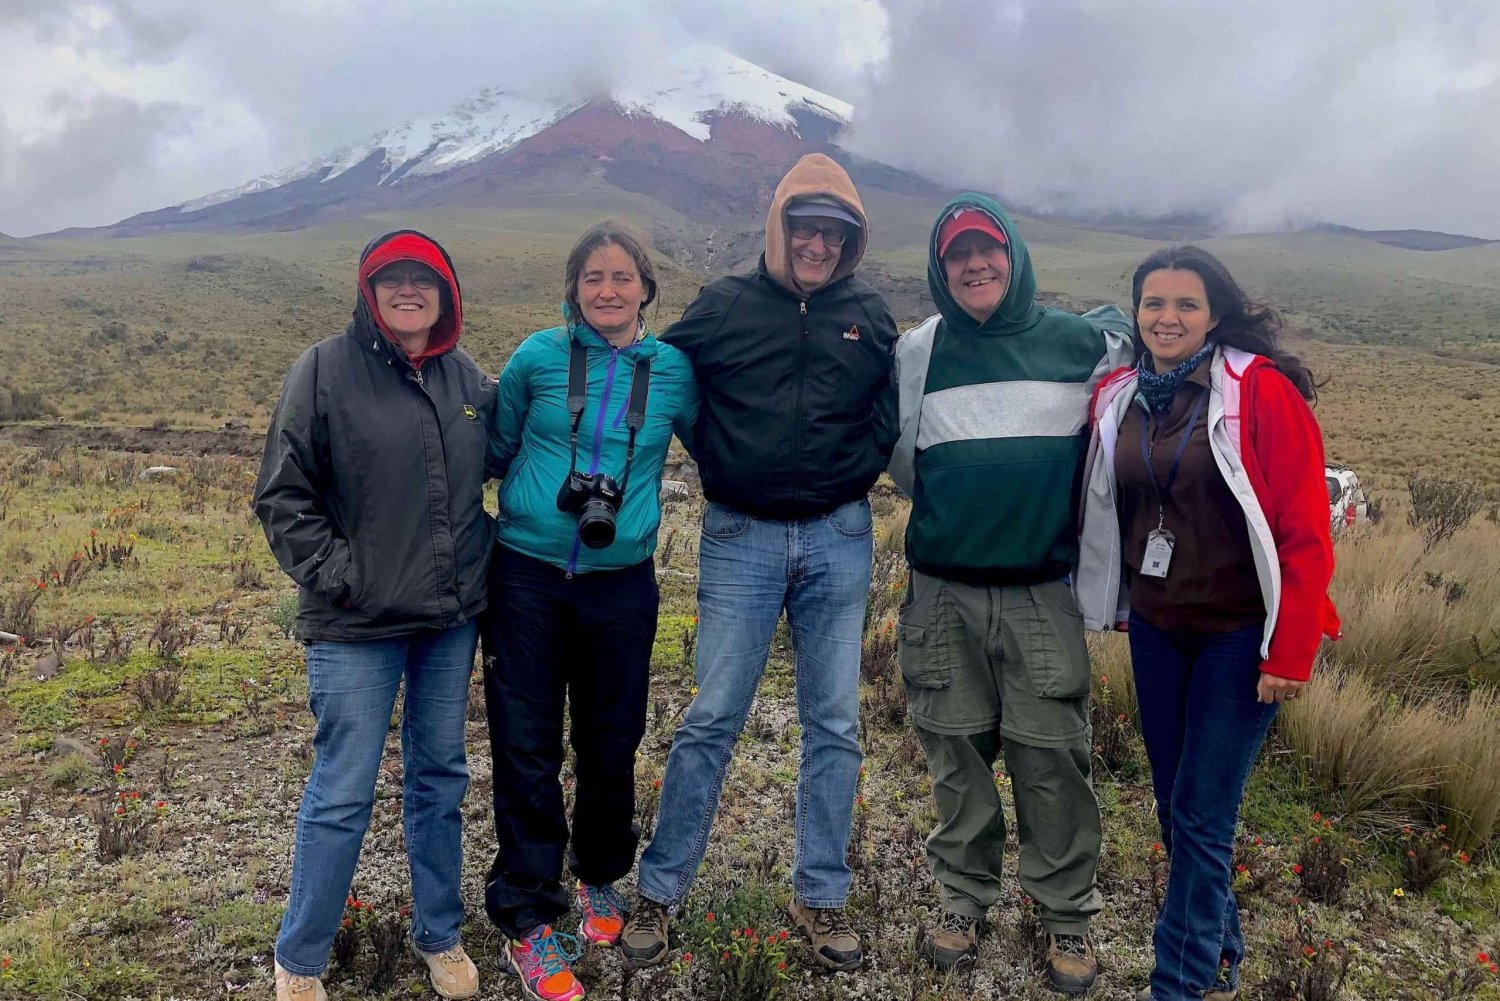 Cotopaxi: The beauty of the Andes